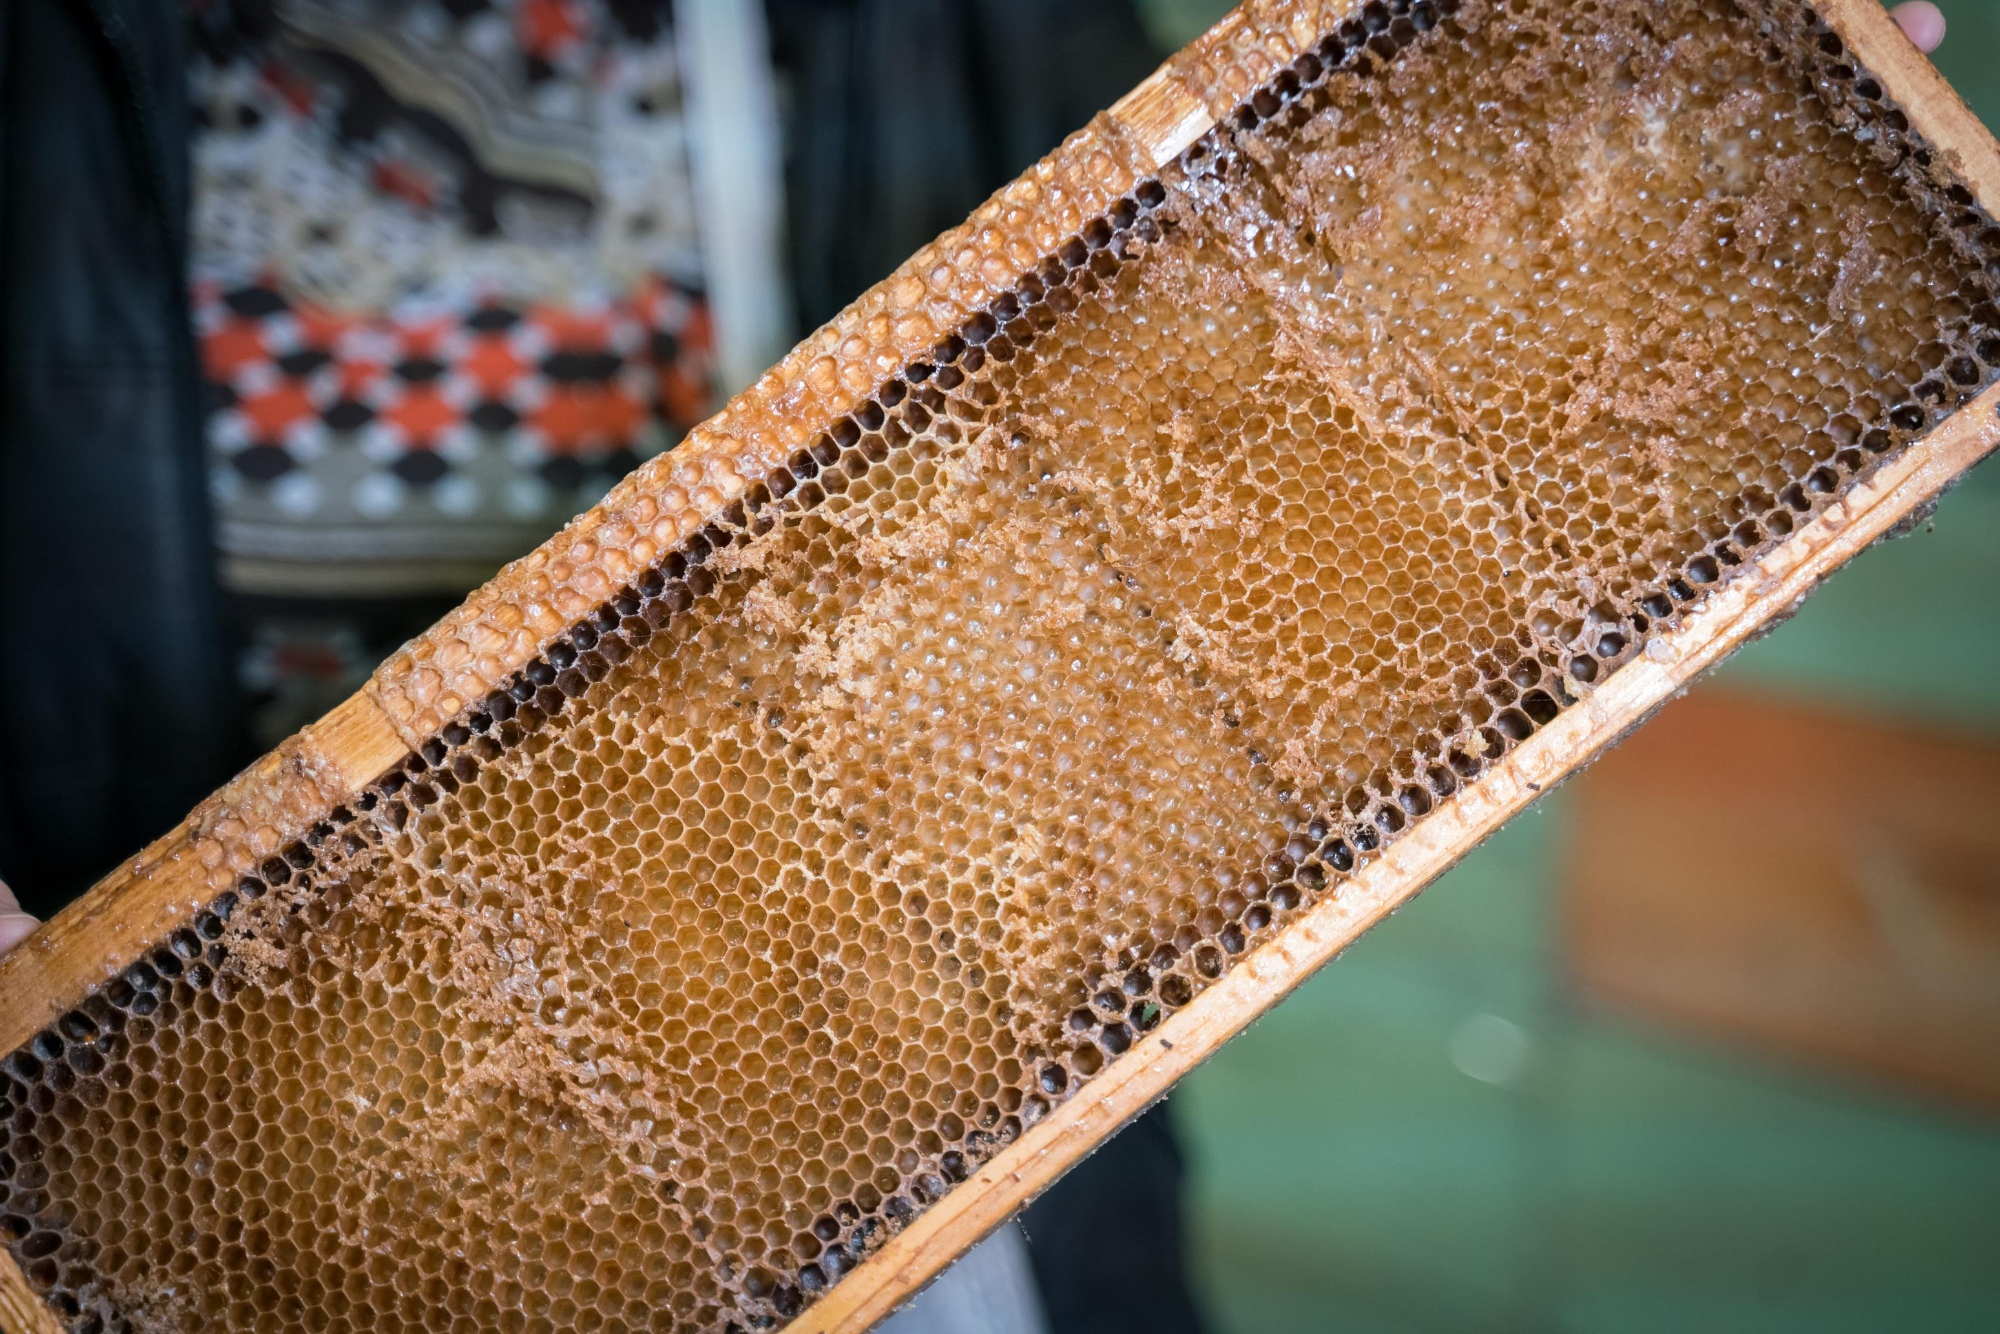 Beehive used for the Lunigiana PDO honey production